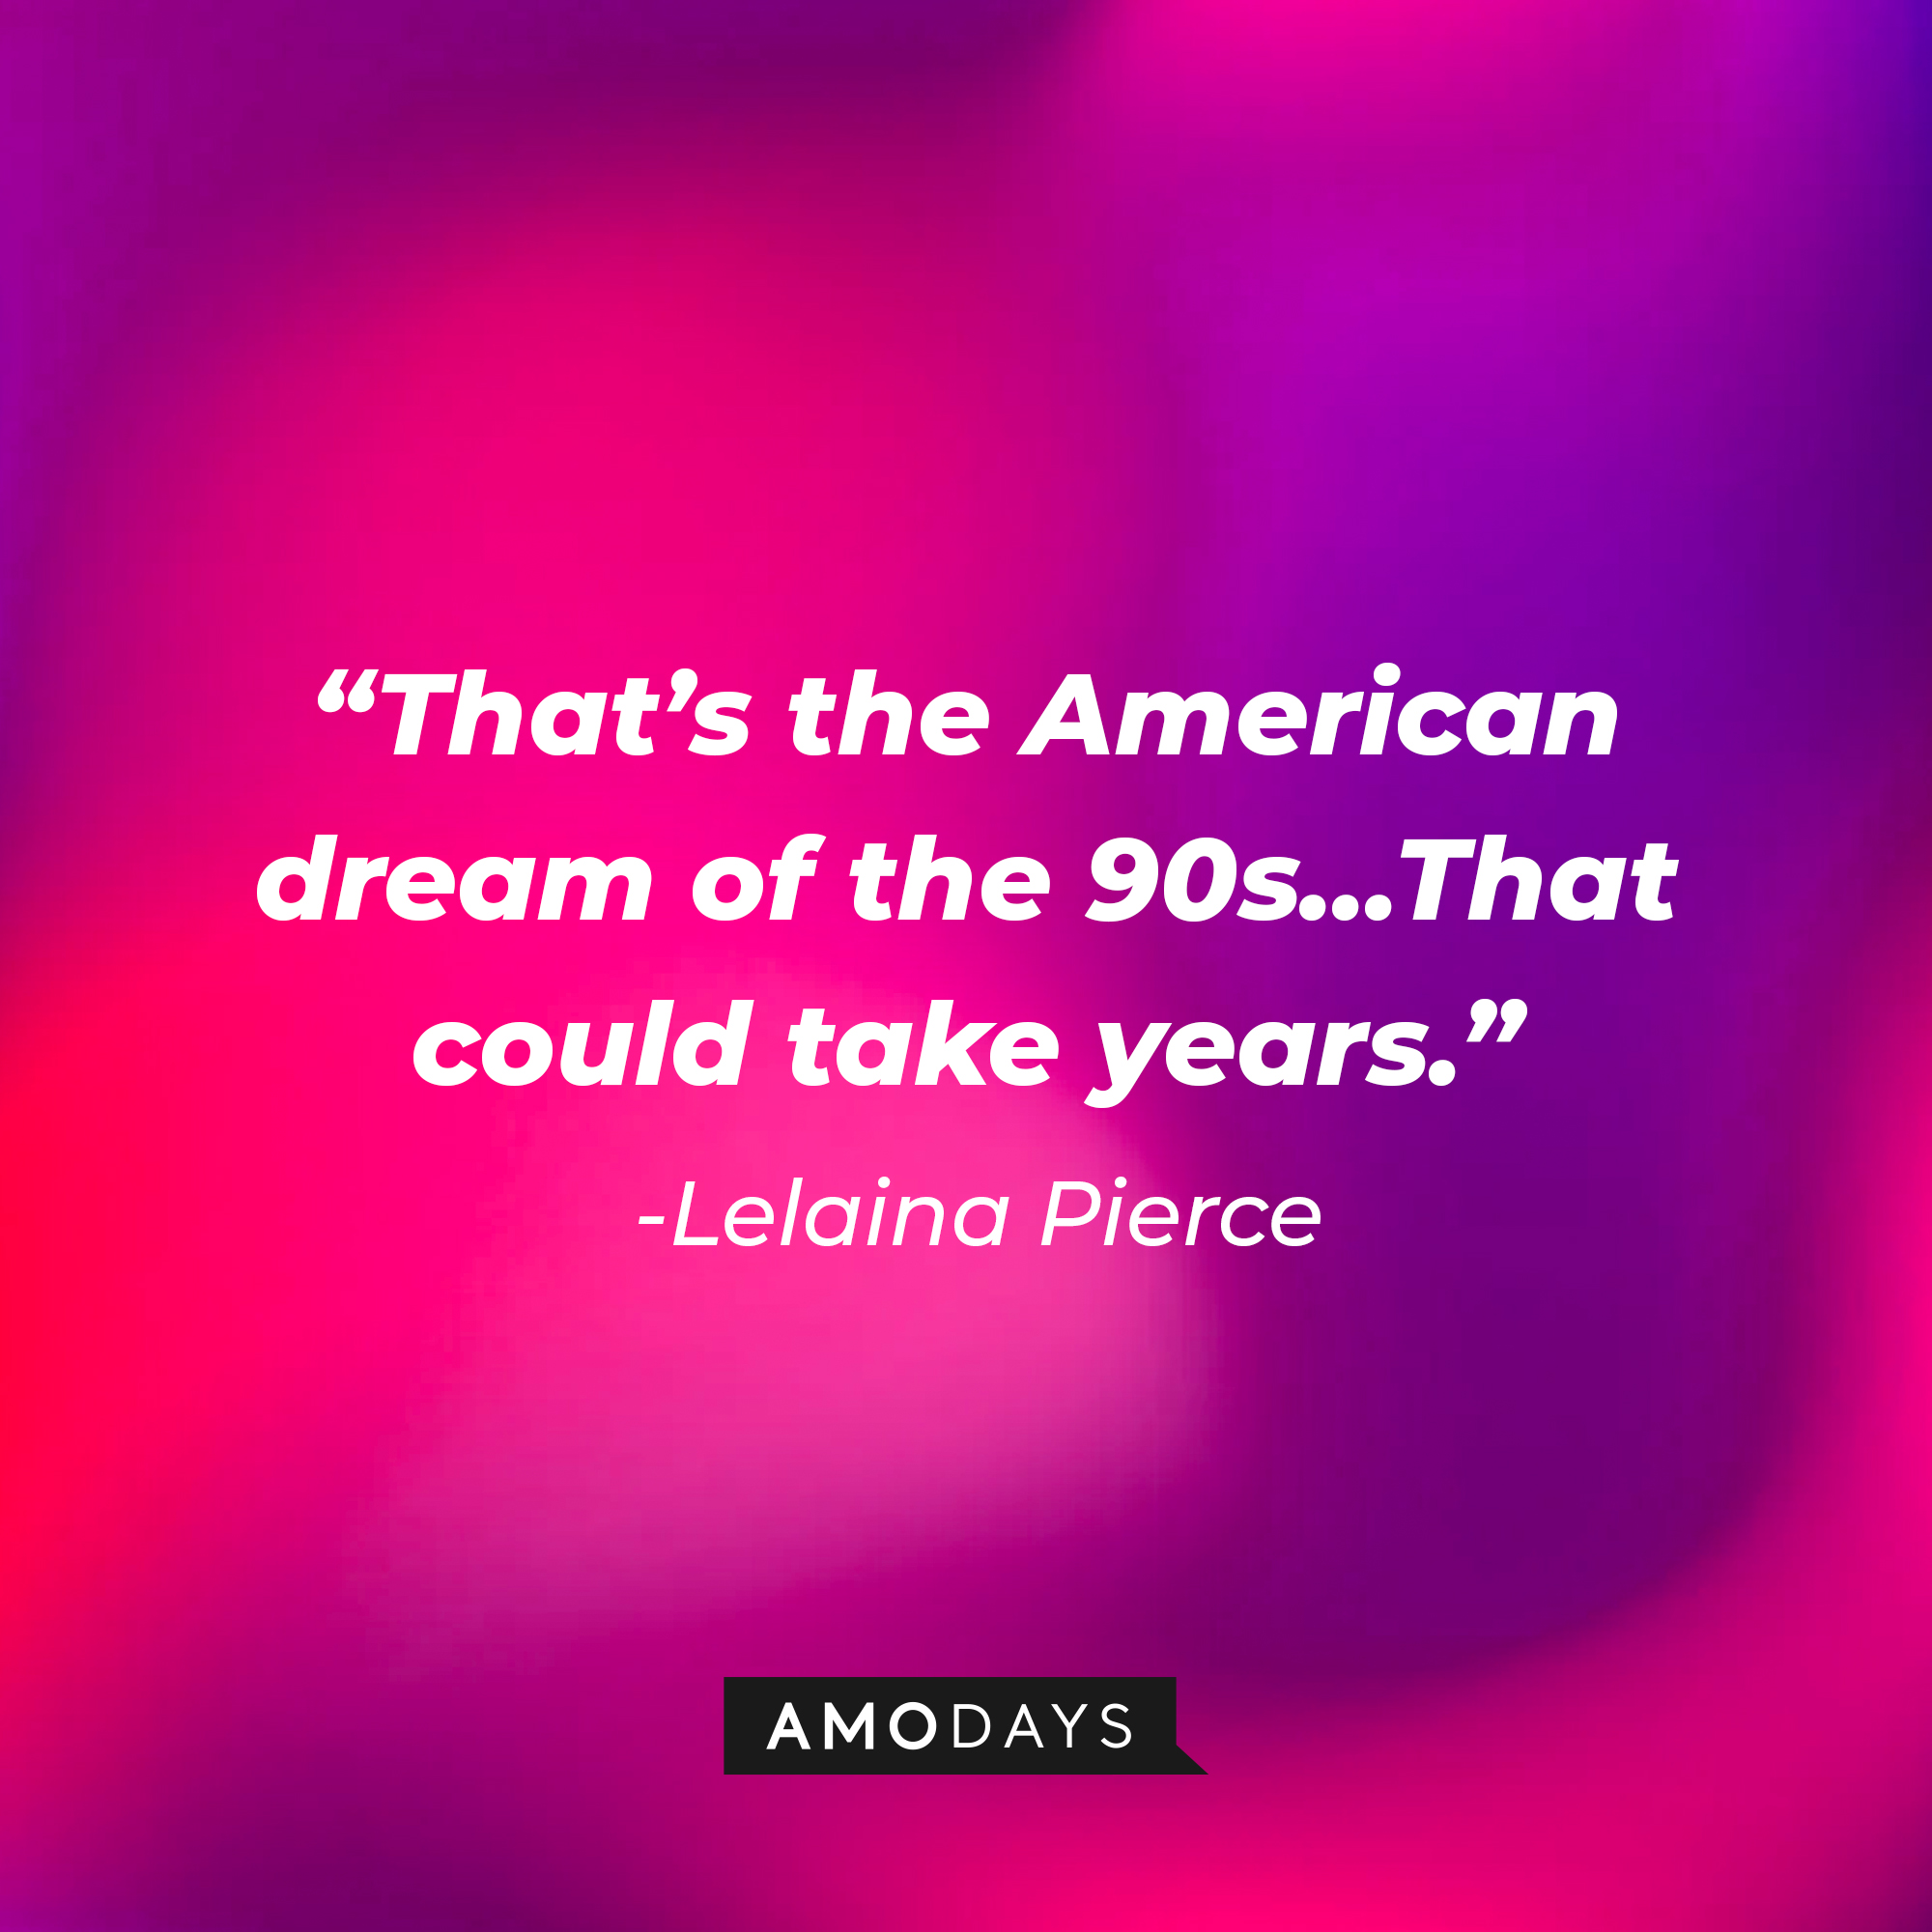 Lelaina Pierce’s quote: “That’s the American dream of the 90s...That could take years.” | Source: AmoDays